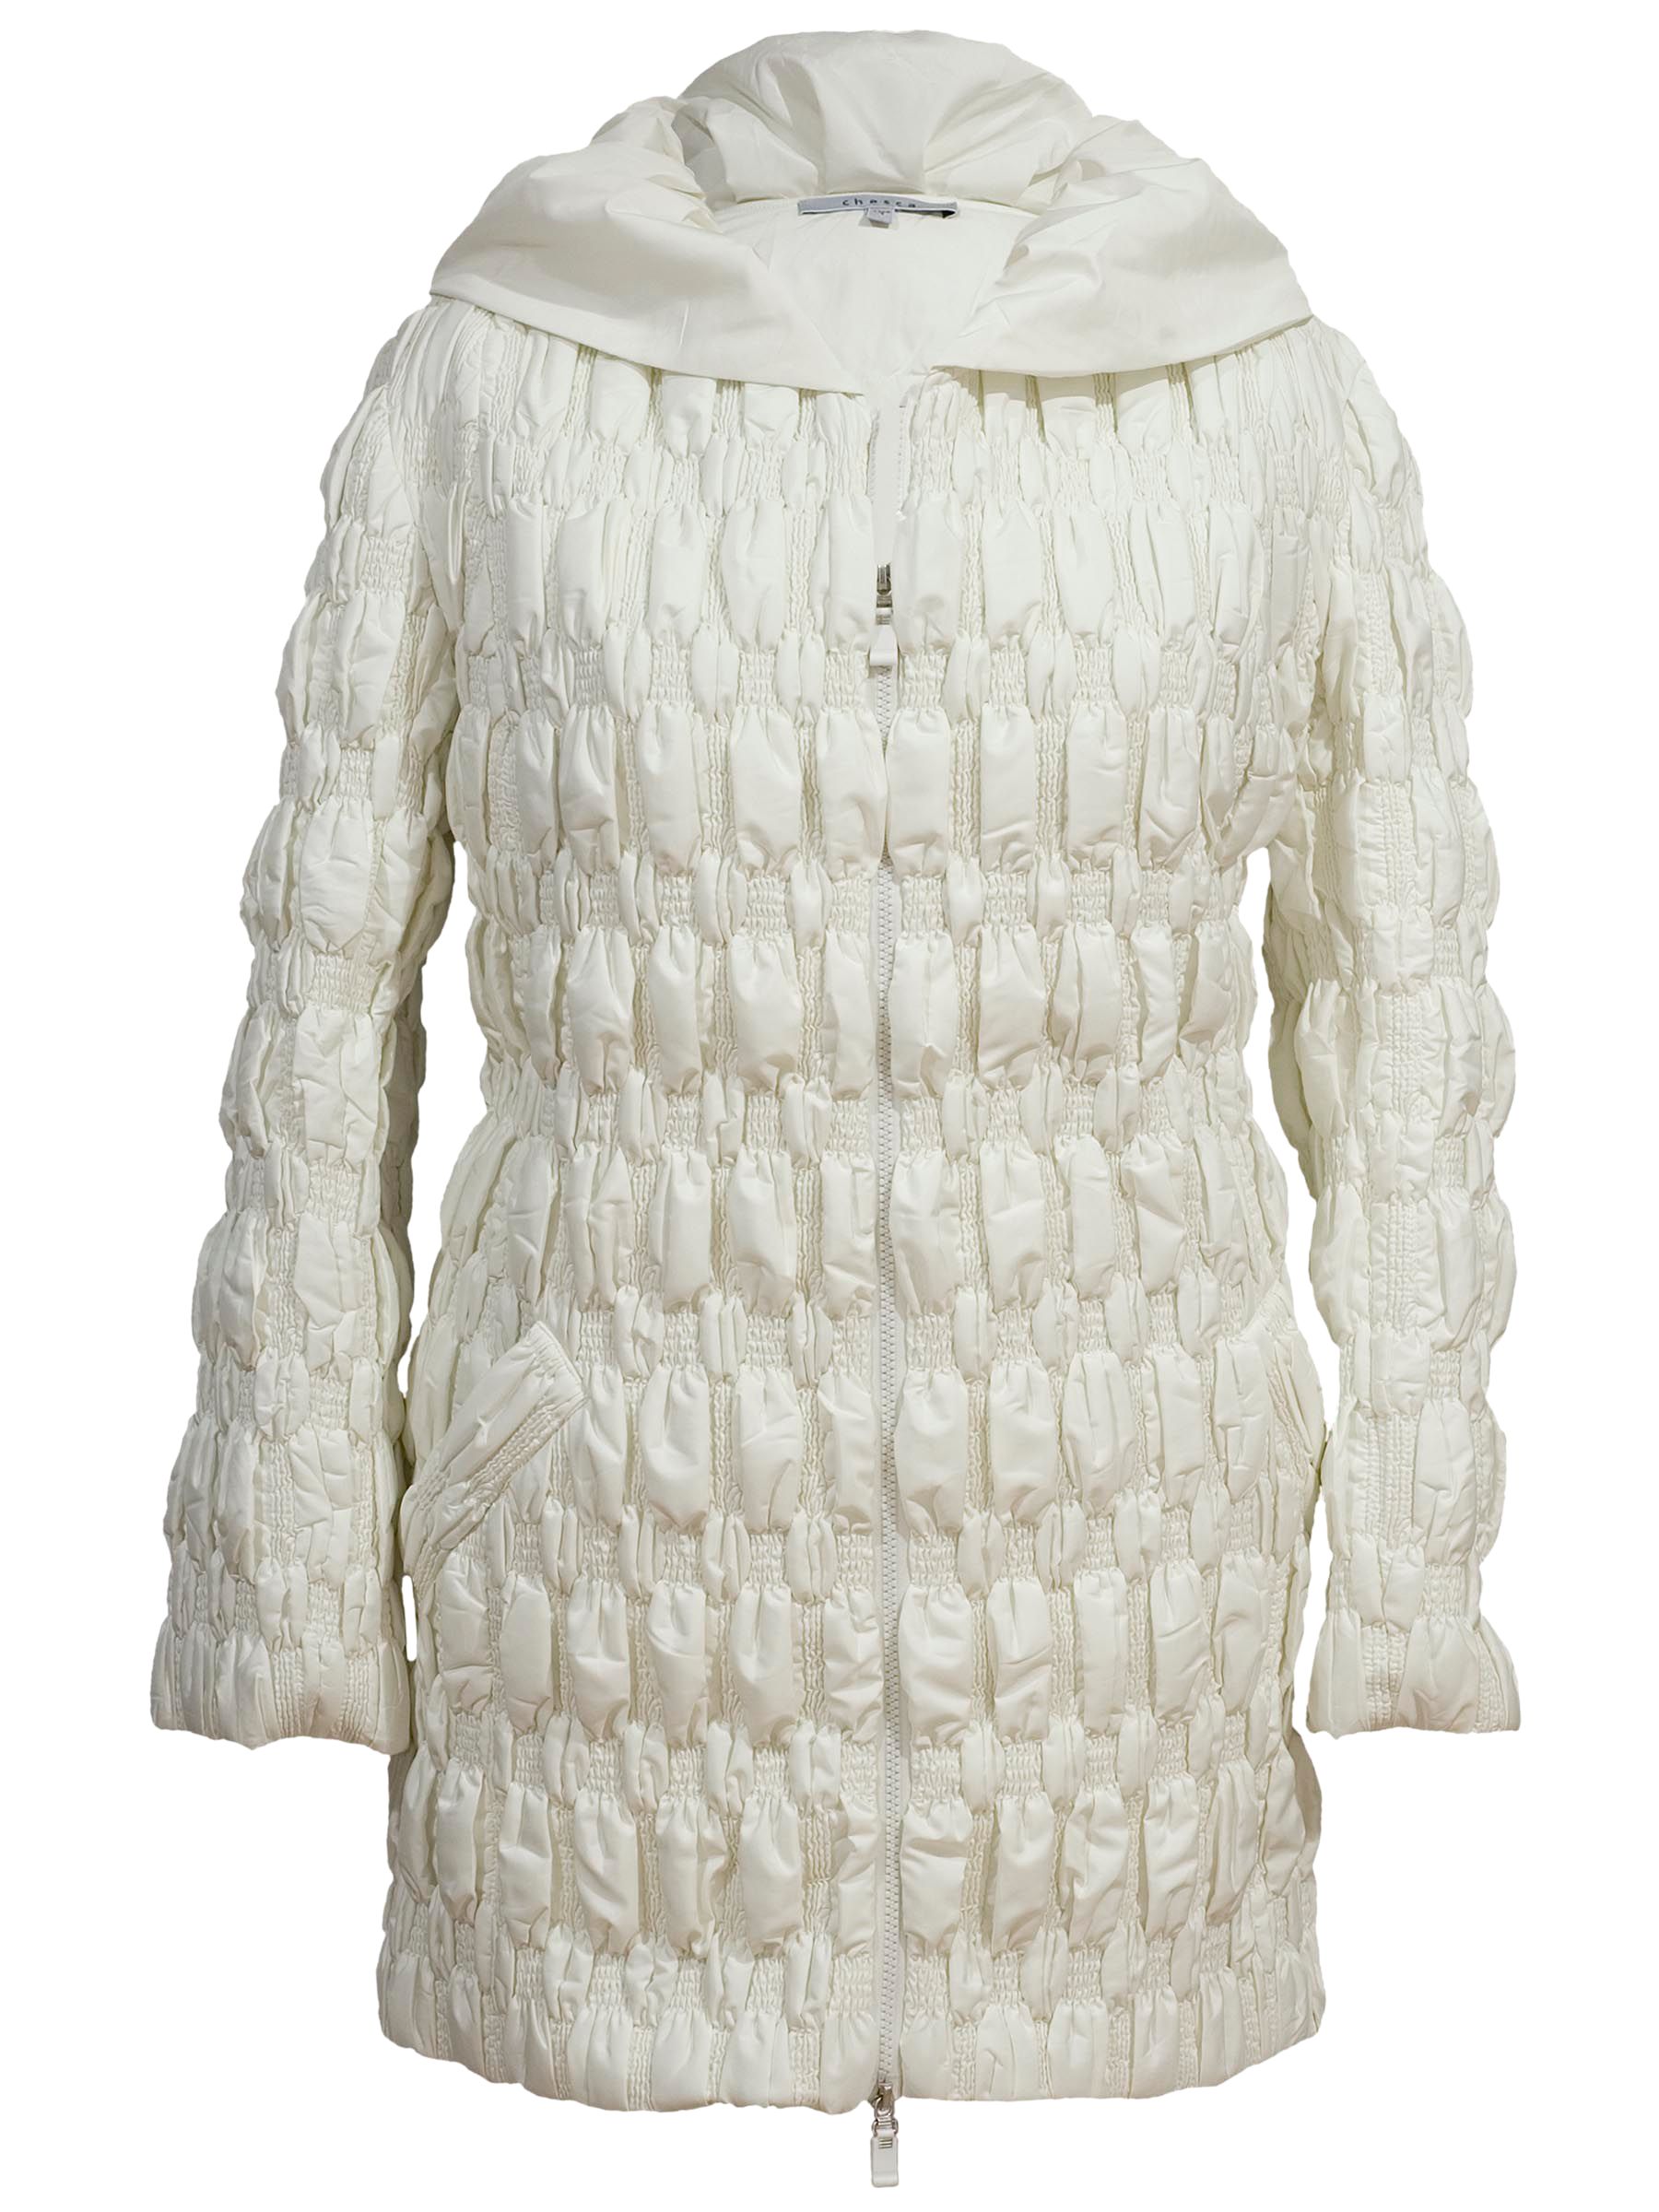 Chesca Brick Quilted Coat, Ivory at John Lewis